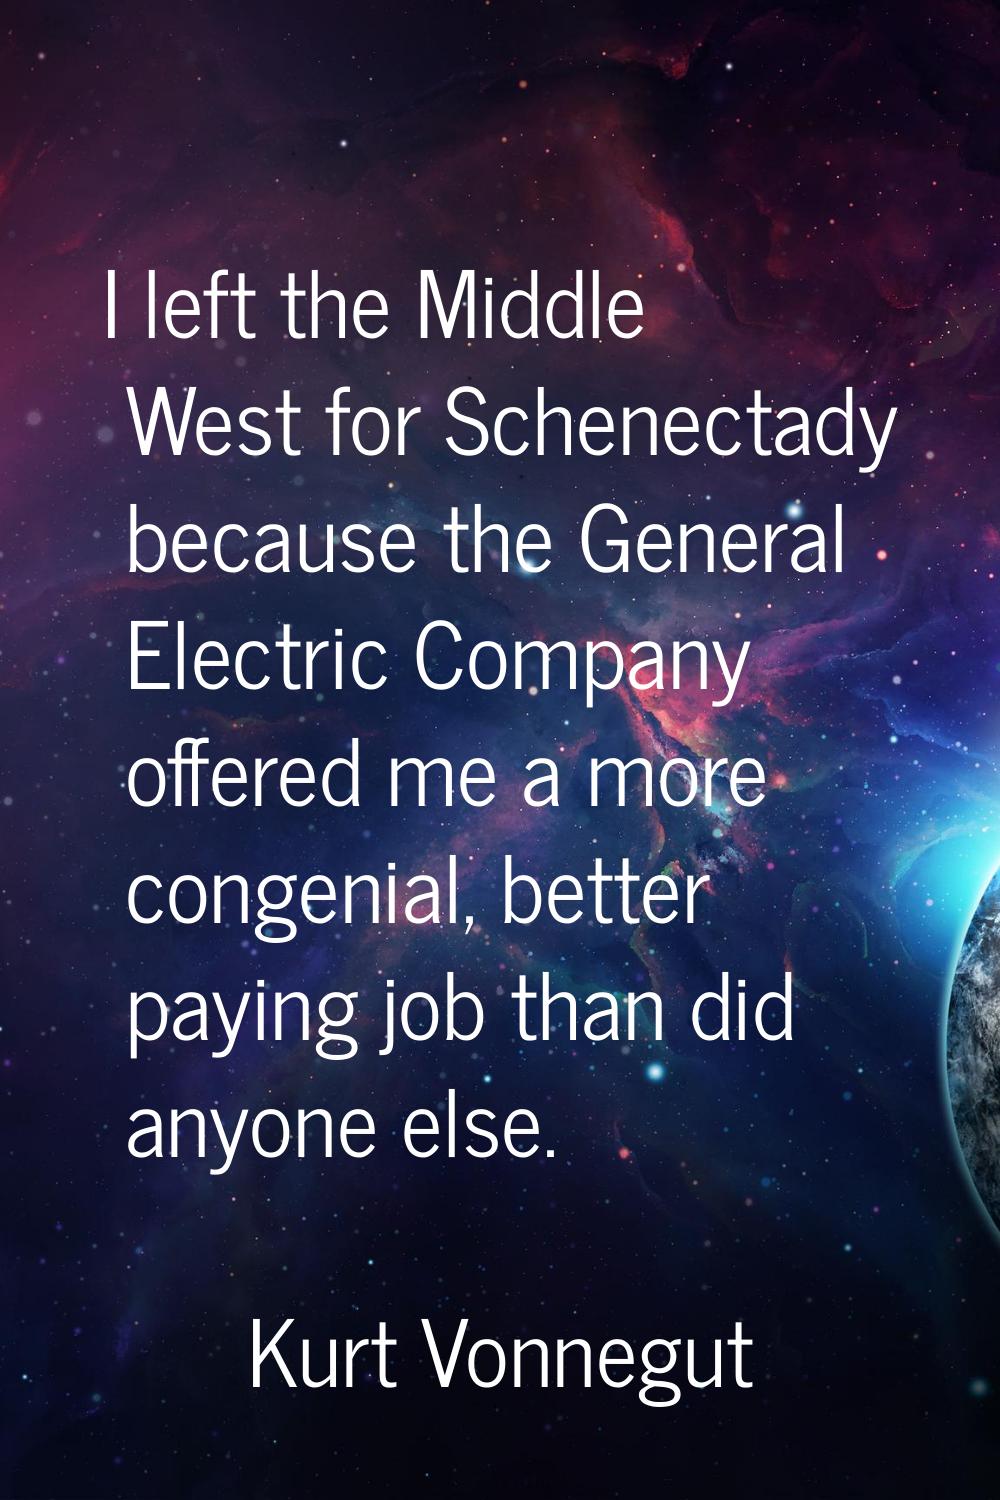 I left the Middle West for Schenectady because the General Electric Company offered me a more conge